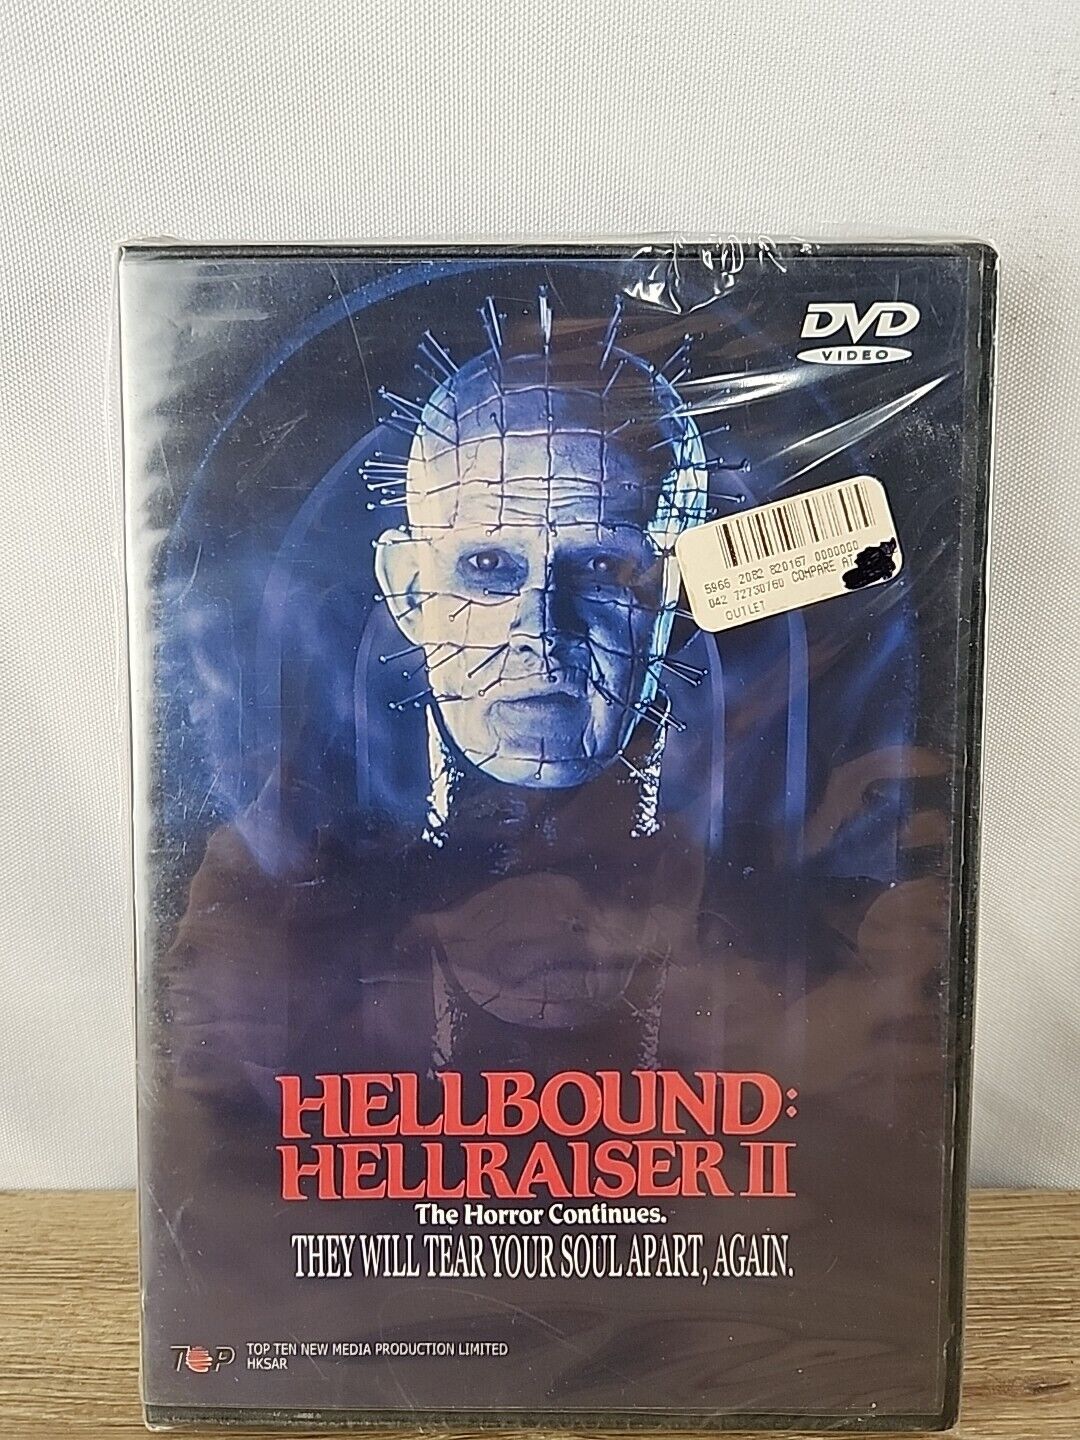 Hellbound: Hellraiser II - The Horror Continues - DVD - NEW & Sealed - RARE